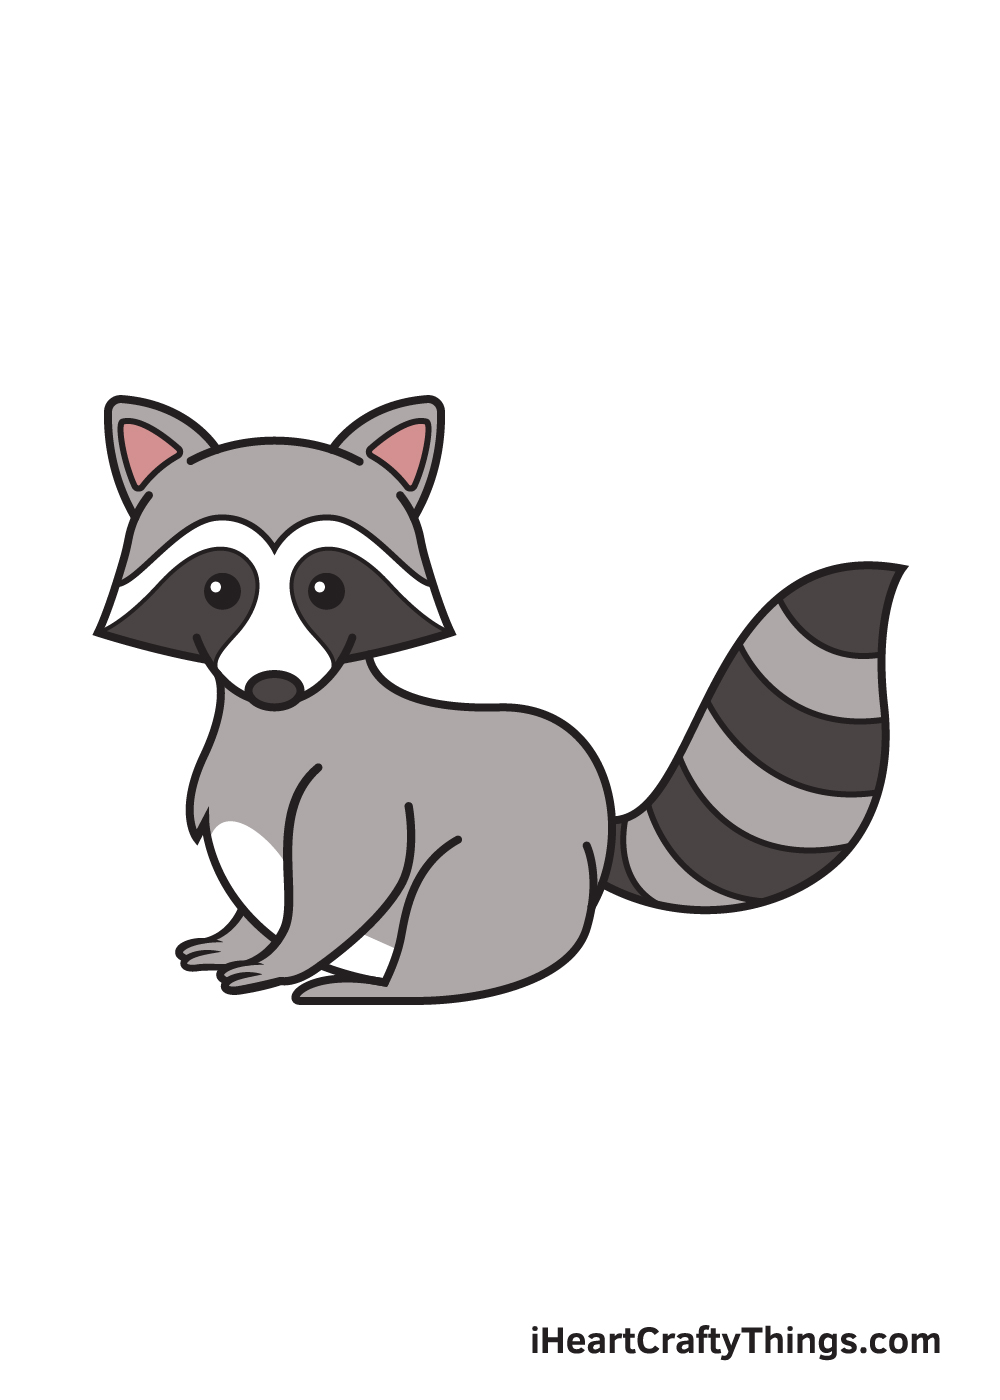 The Rise Of Raccoon Draw Aesthetic On Social Media